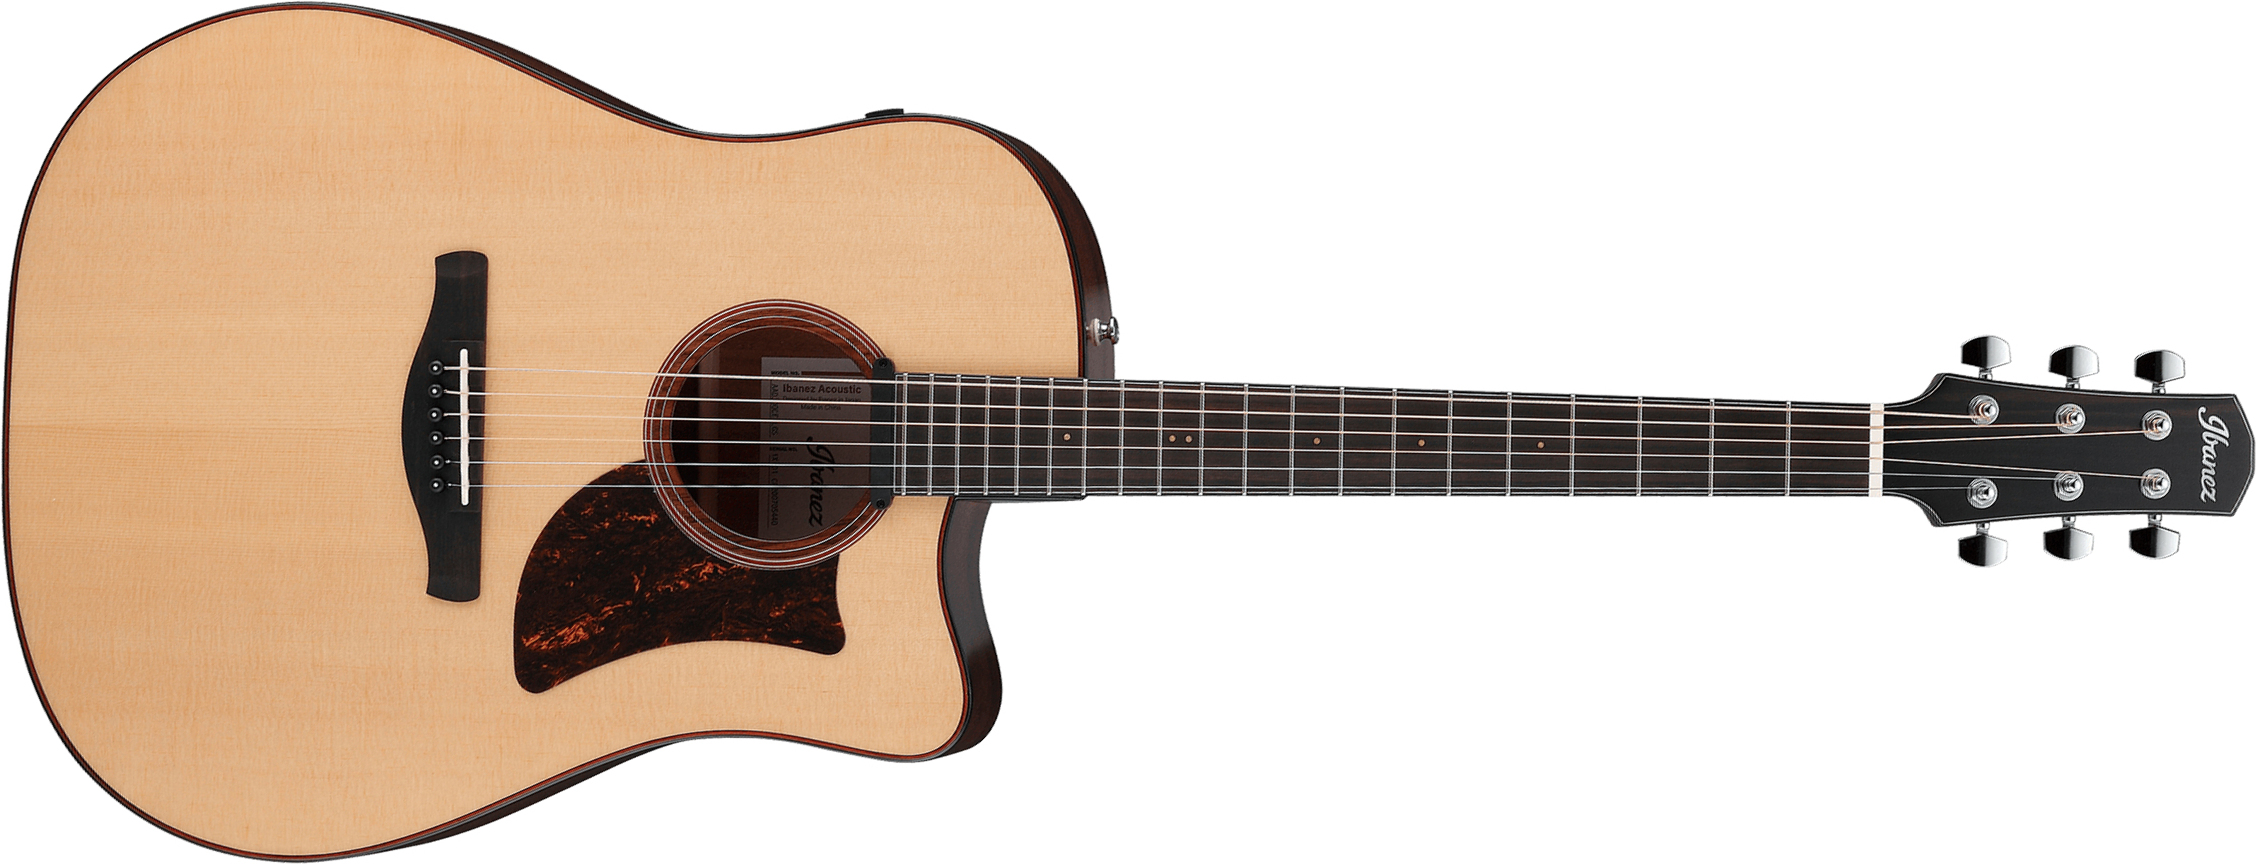 Ibanez Aad300ce Lgs Advanced Dreadnought Cw Epicea Okoume Eb - Natural Low Gloss - Guitare Electro Acoustique - Main picture